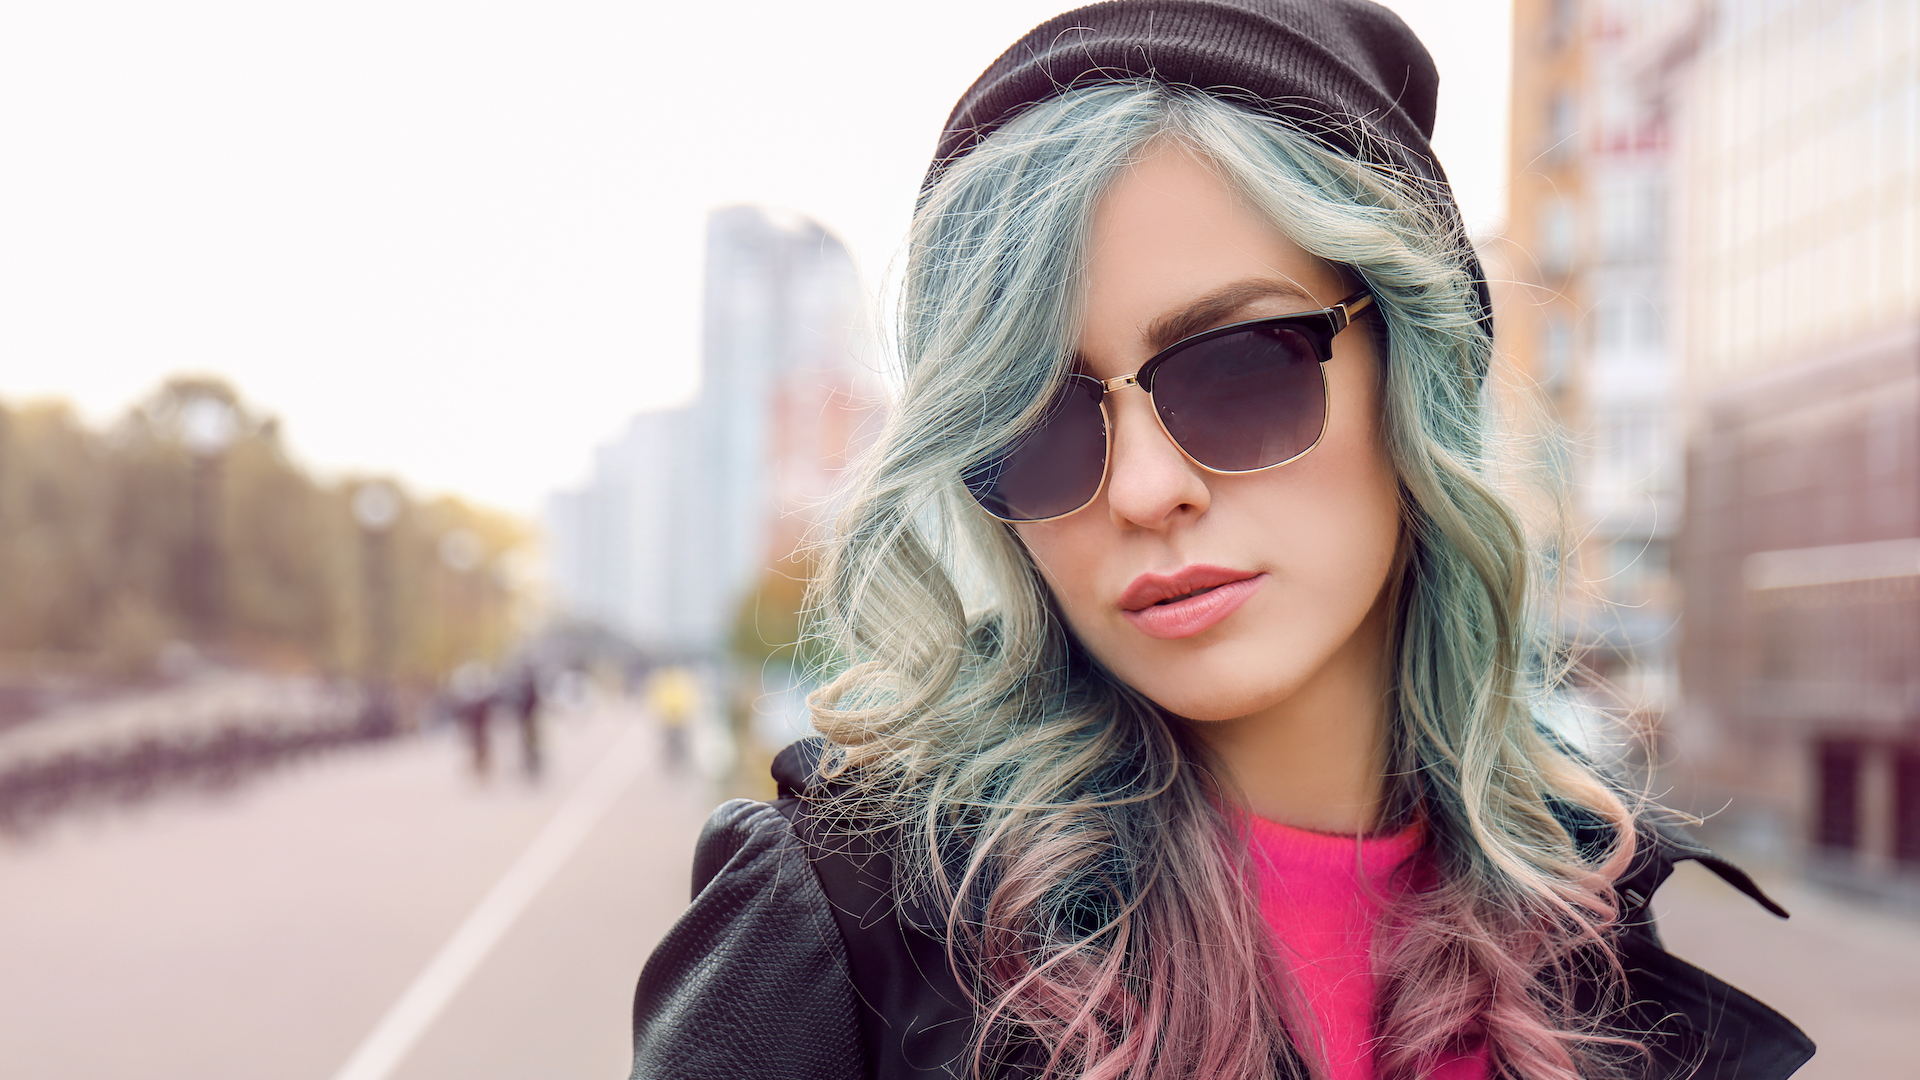 A woman in sunglasses and a beanie